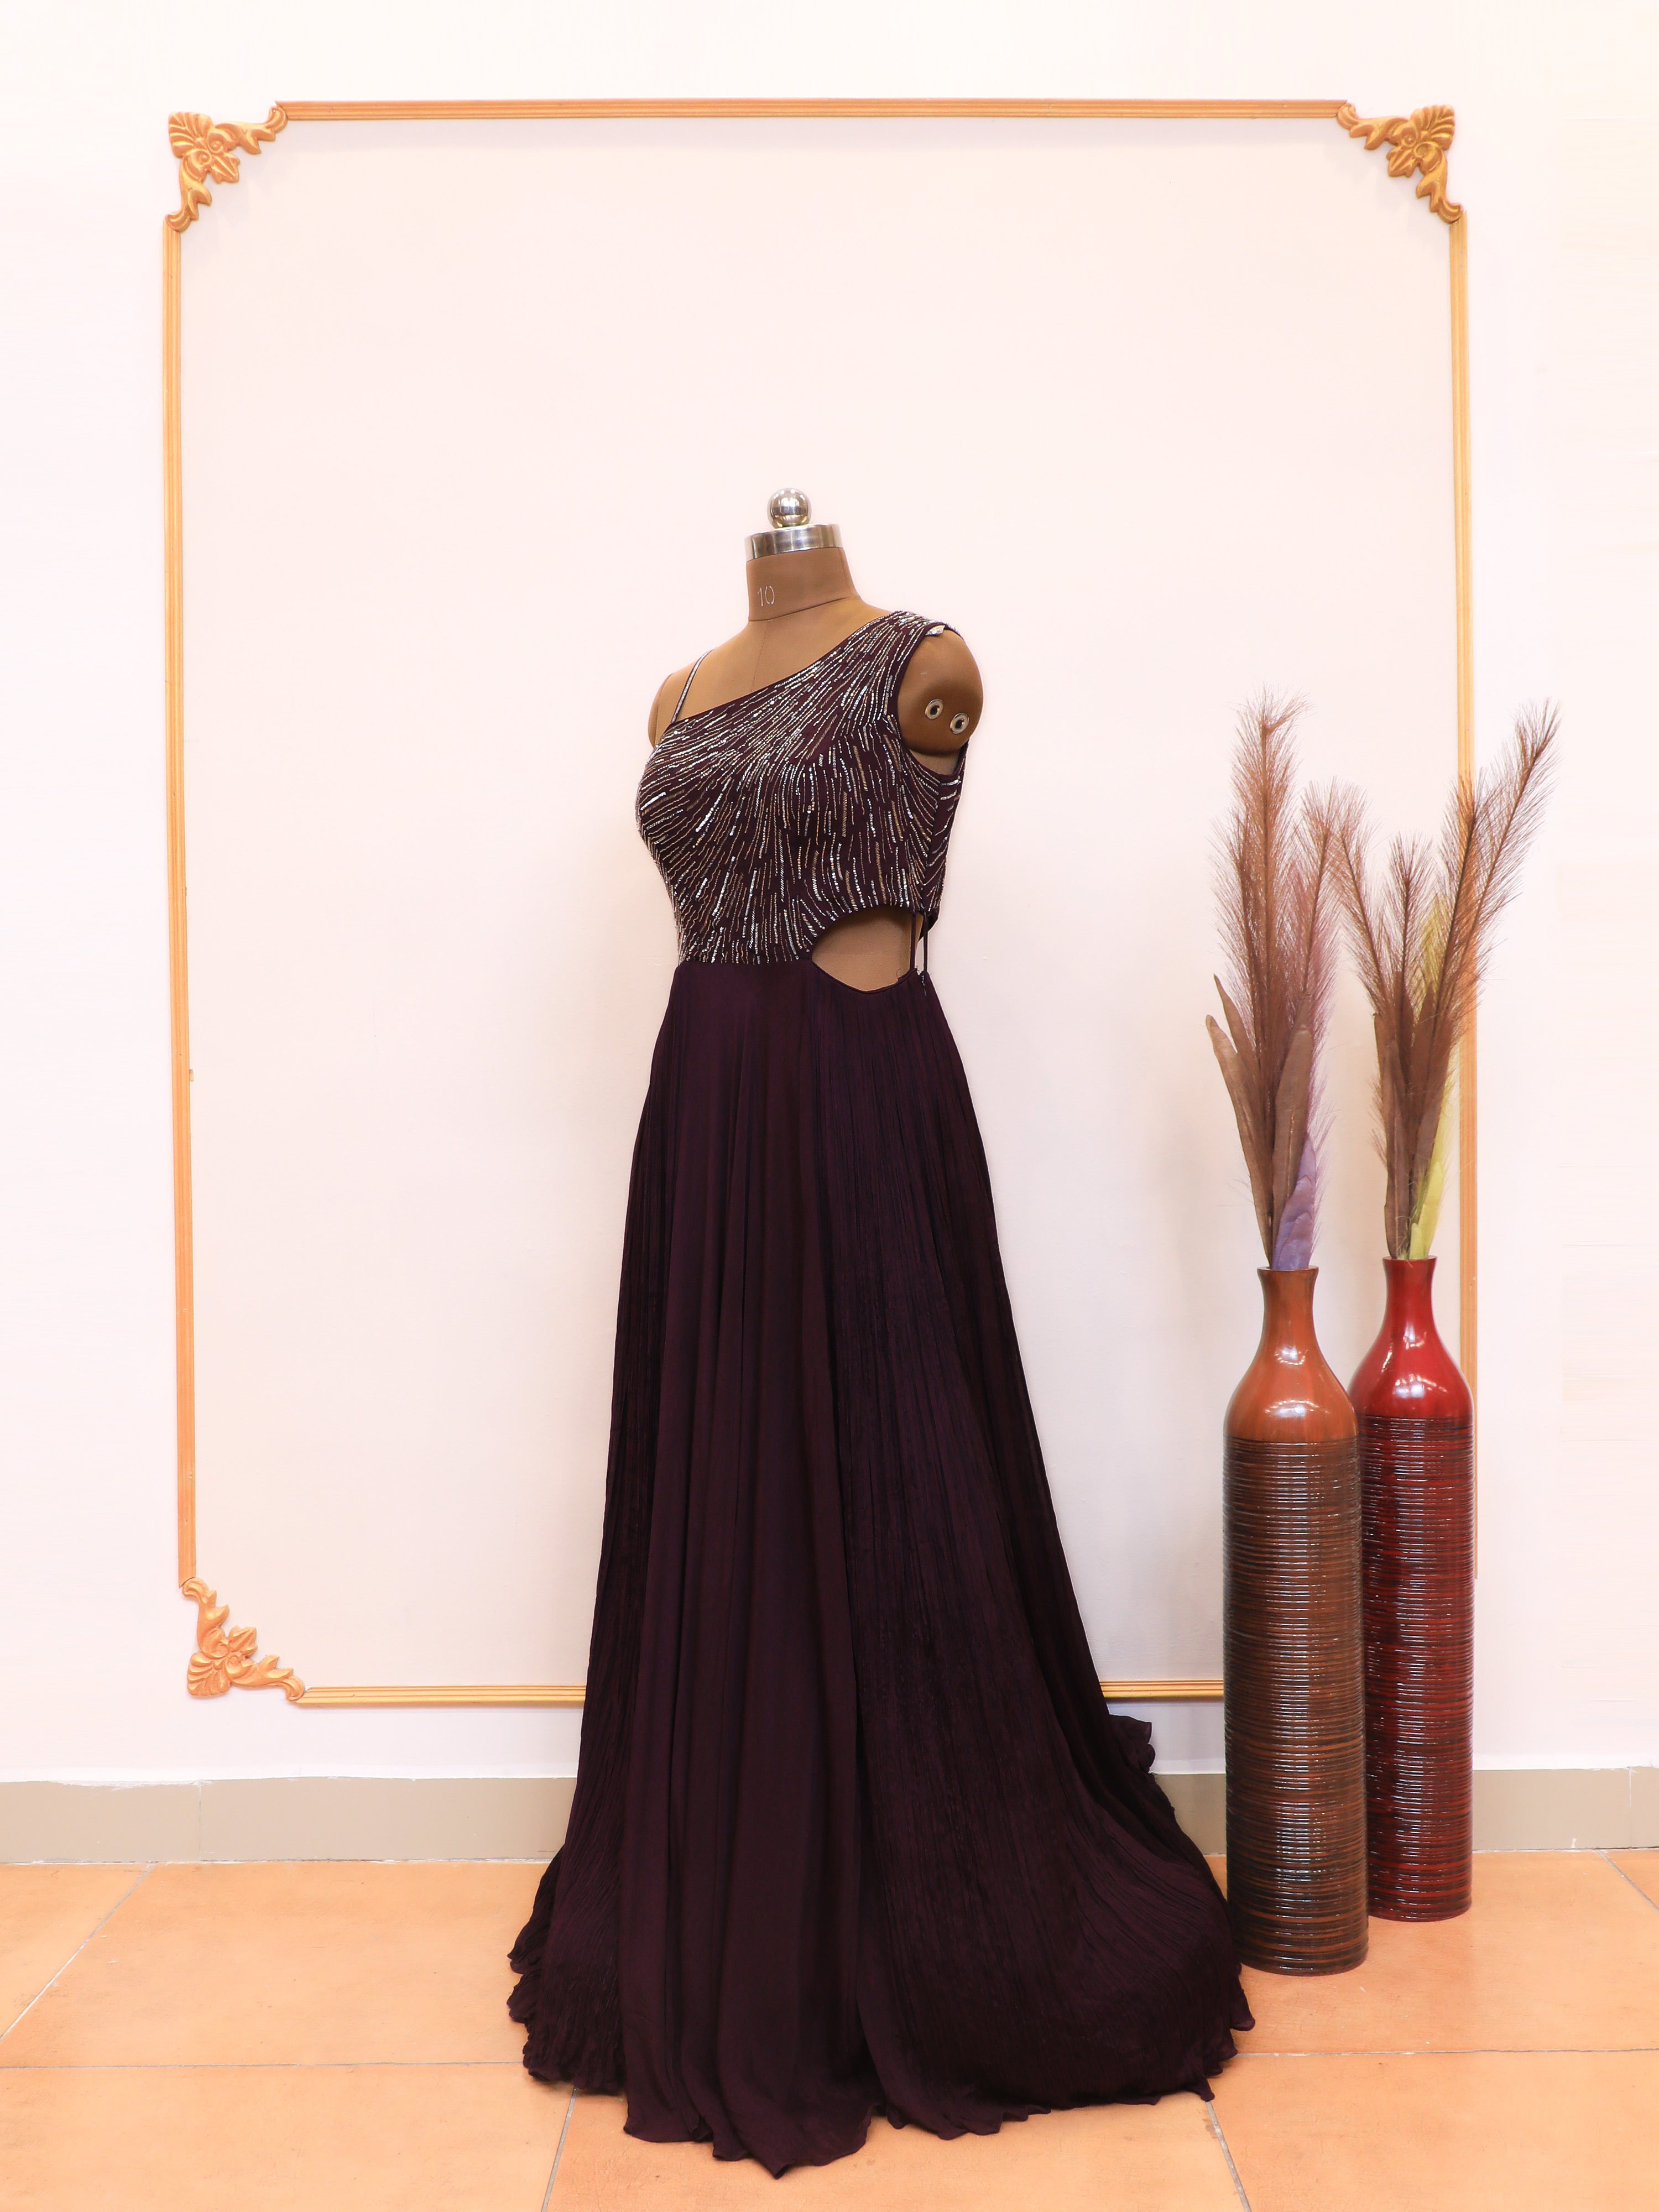 Hand Work Gowns Online: Latest Designs of Hand Work Gowns Shopping